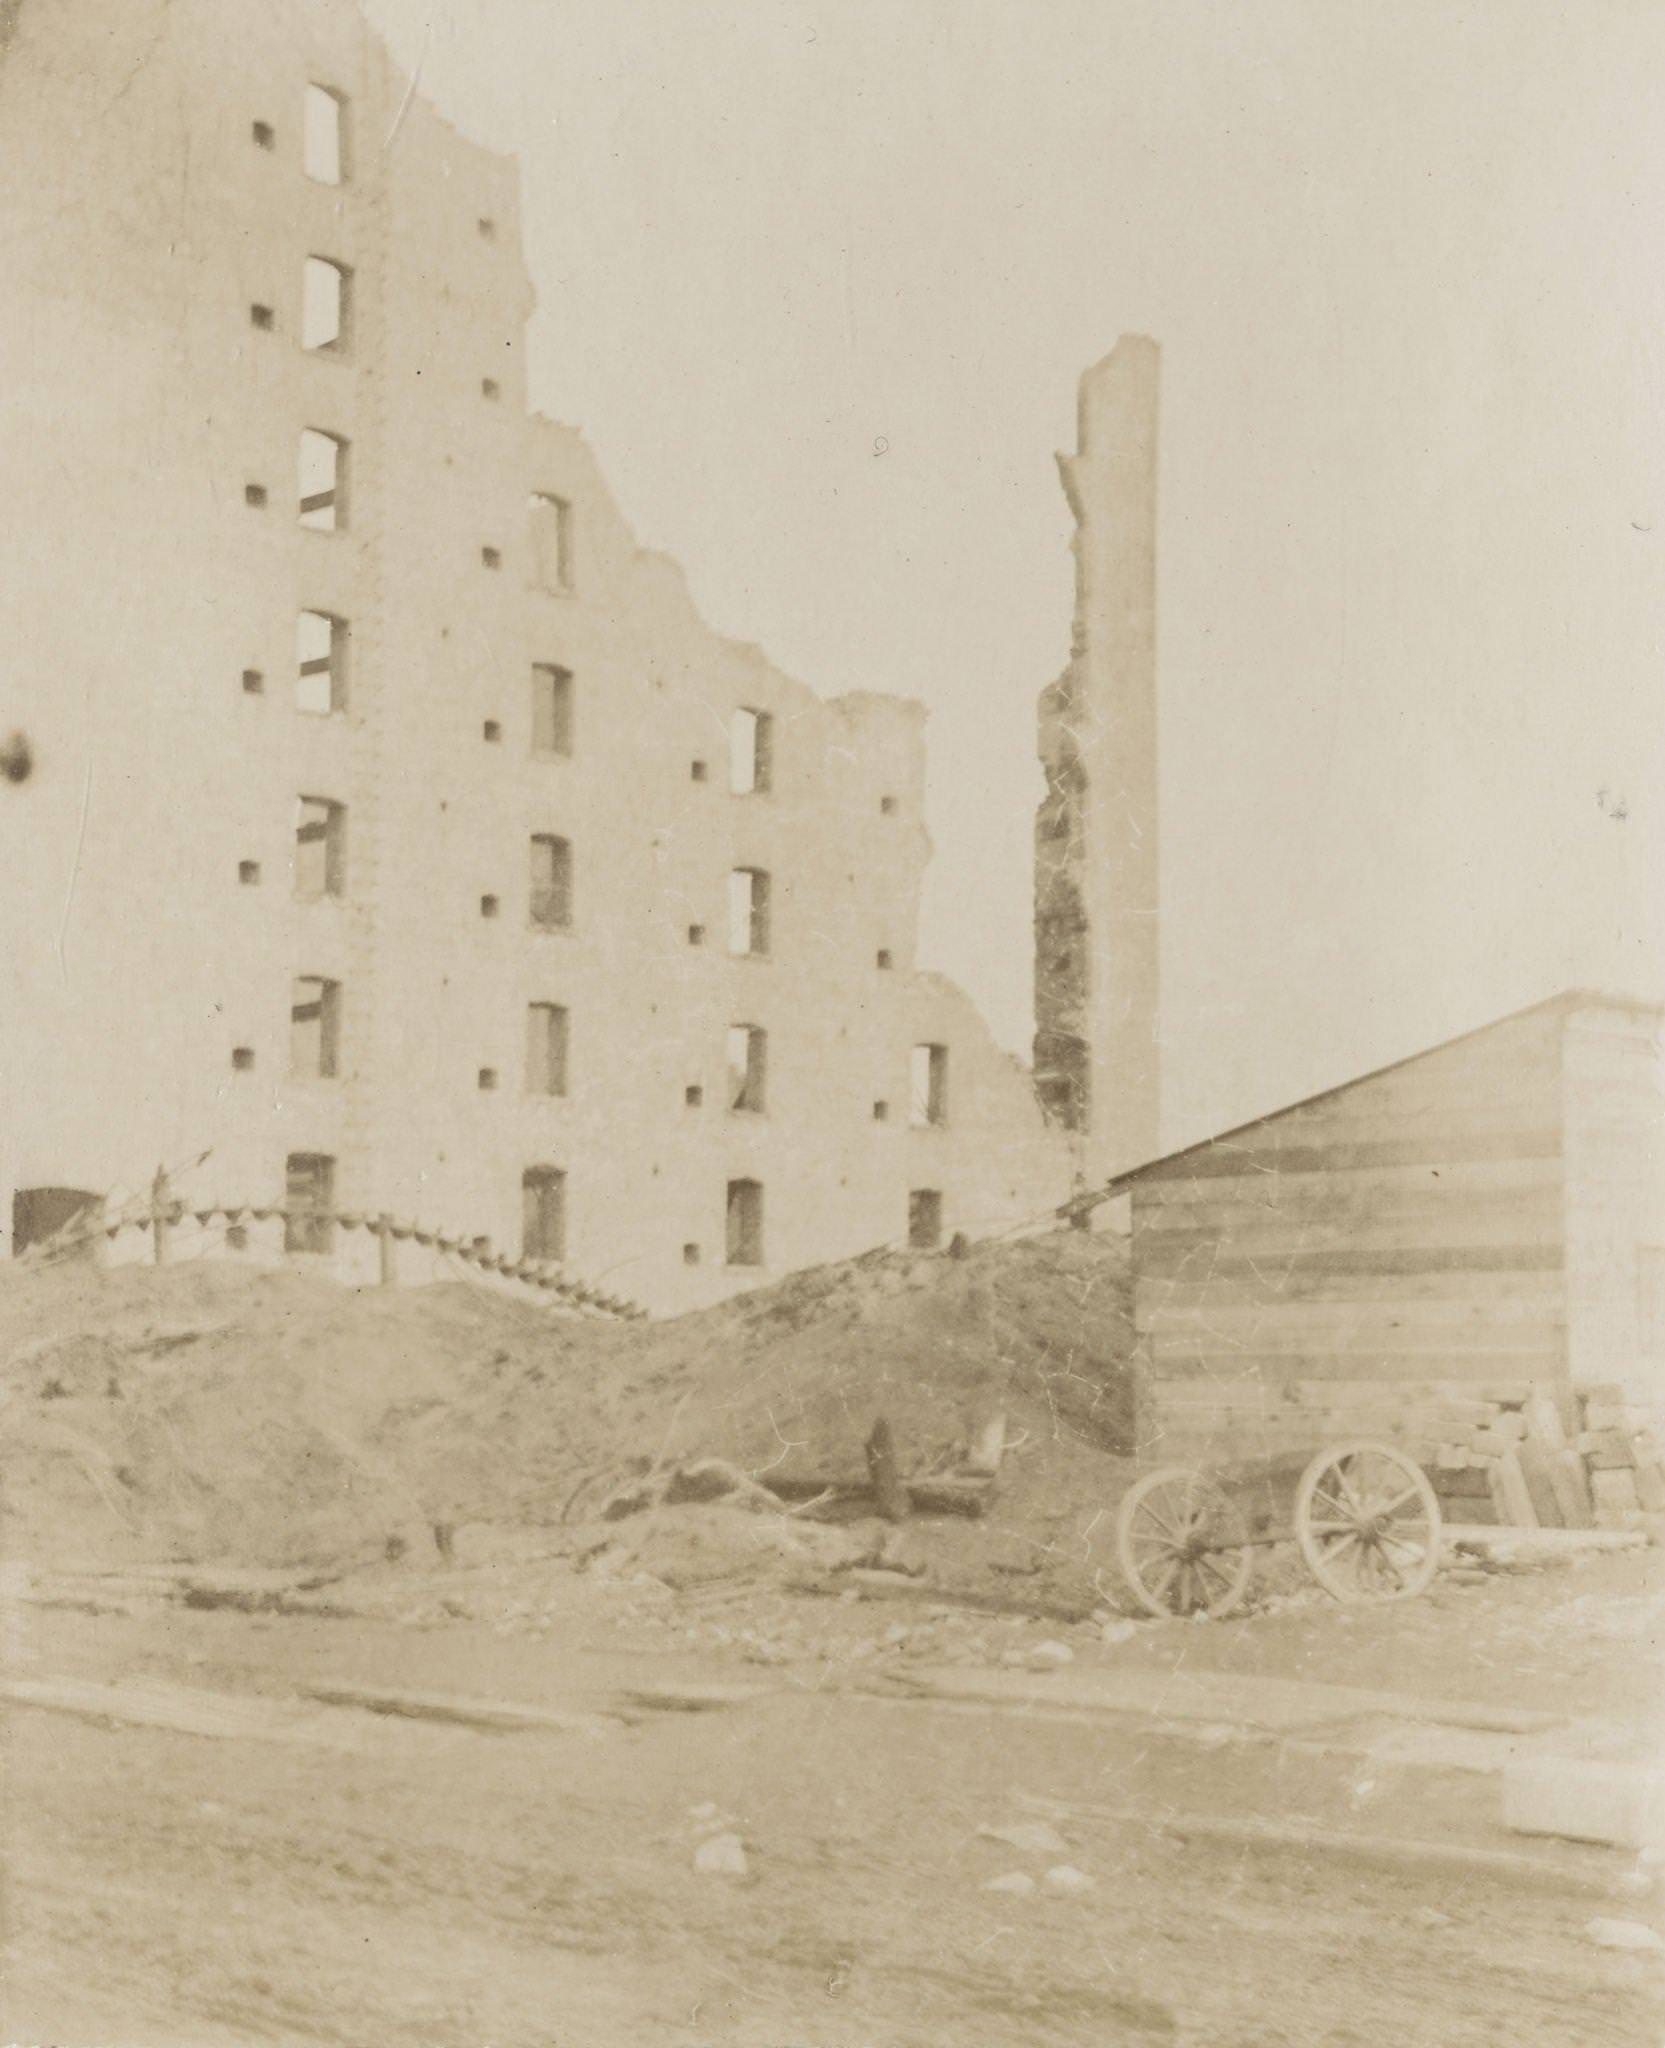 View of the ruins from a fire in the 3rd Ward, Milwaukee, Wisconsin, 1893.